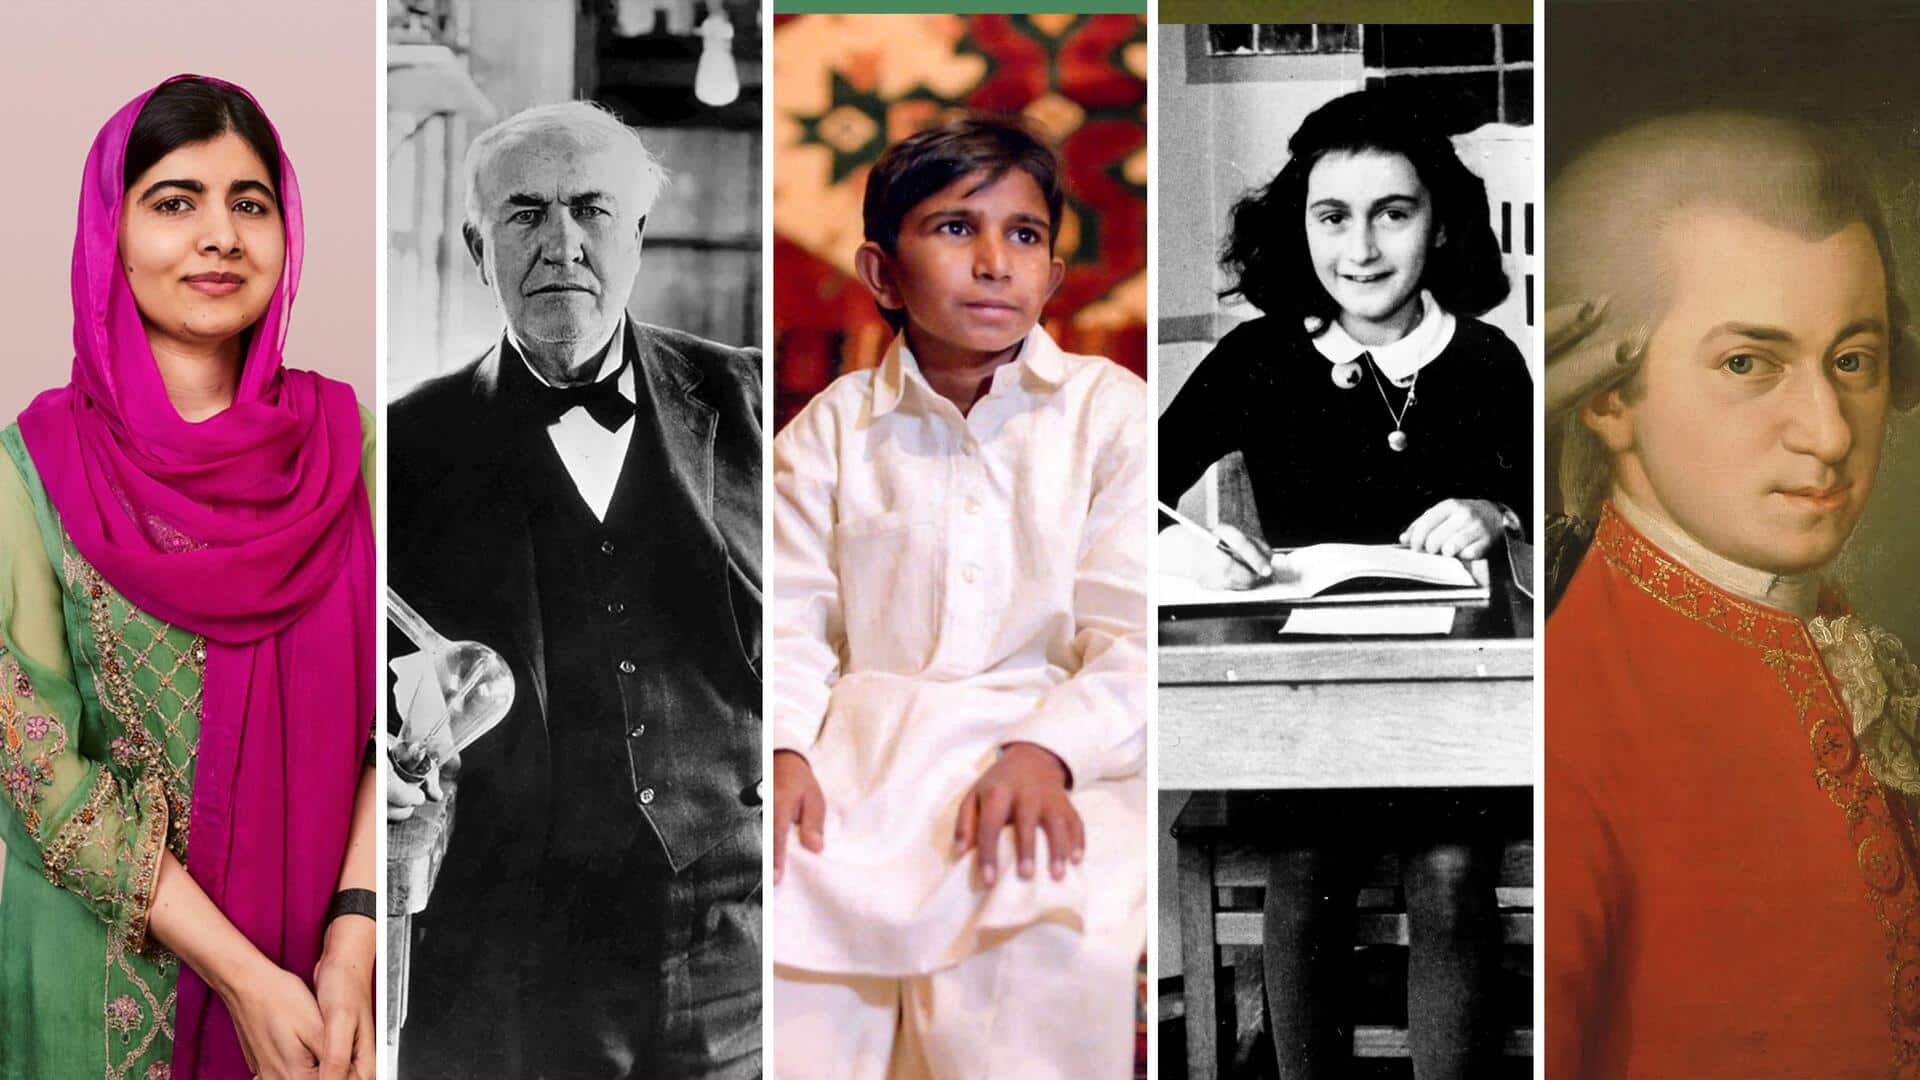 These children shaped history with their inspiring tales